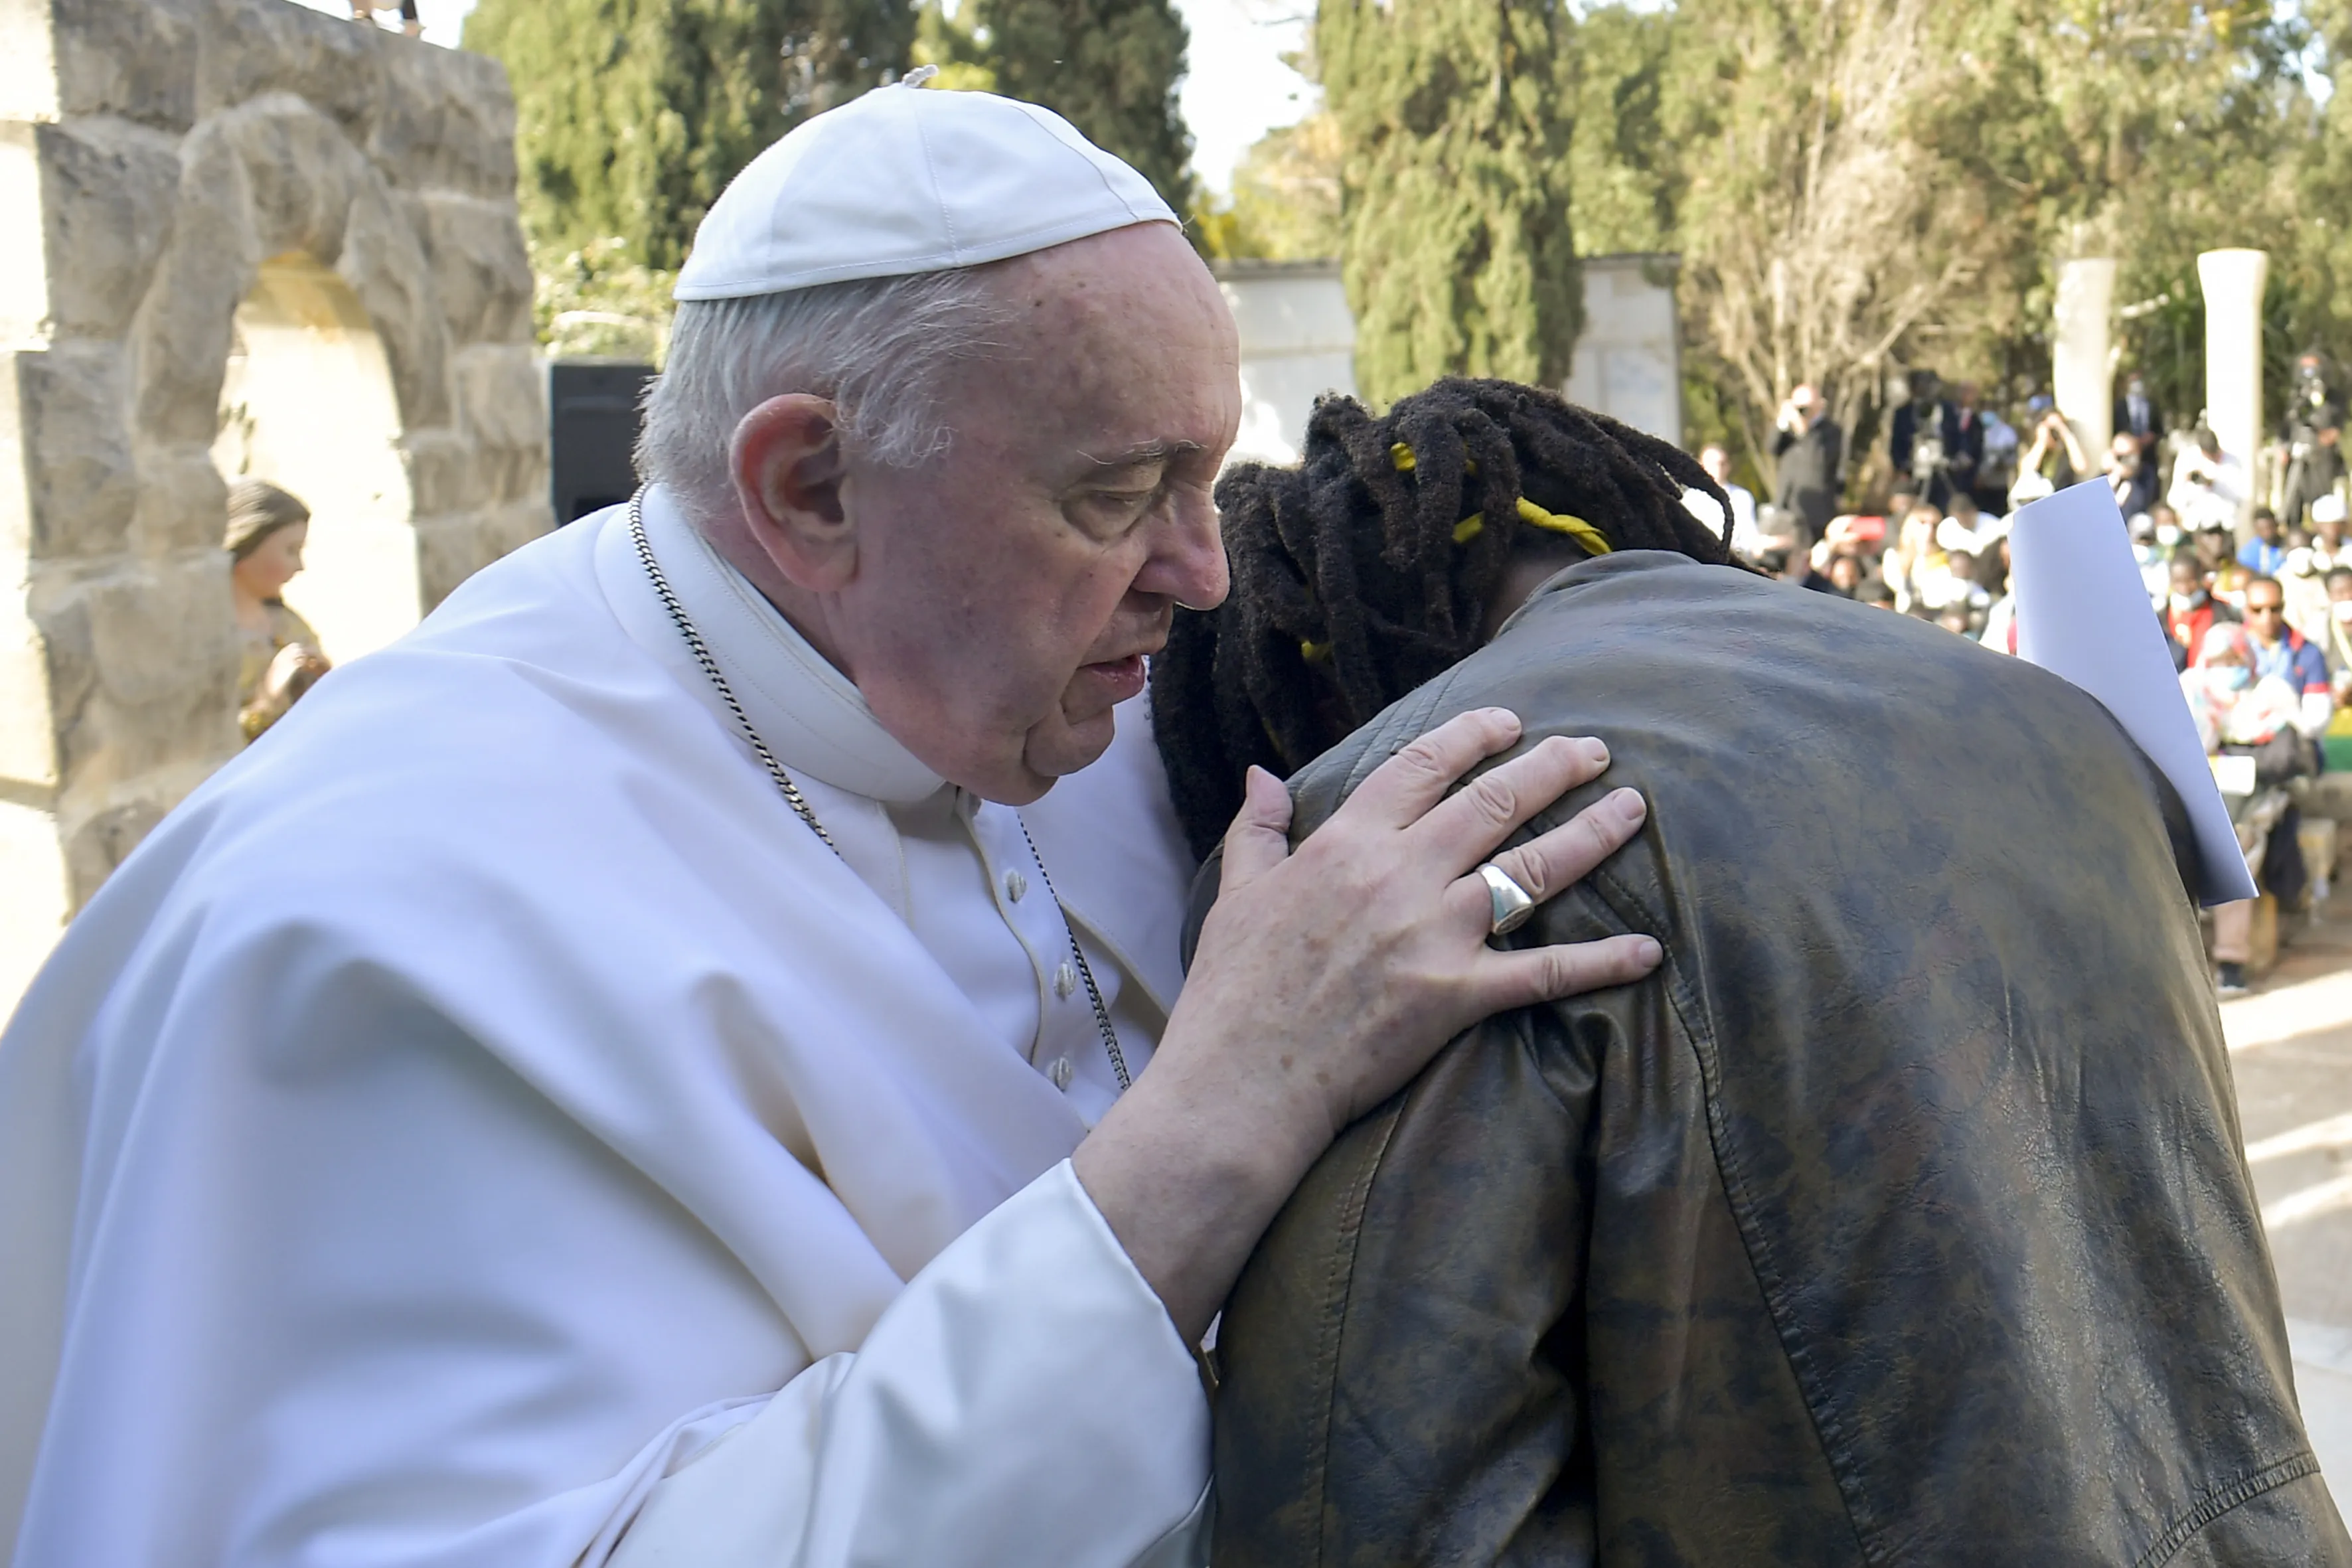 Pope Francis embraces Daniel Jude Oukeguale, who detailed his arduous journey of escaping Nigeria in an effort to be smuggled into Europe, during the pope's visit to an immigration reception center in Hal Far, Malta, on April 3, 2022.?w=200&h=150